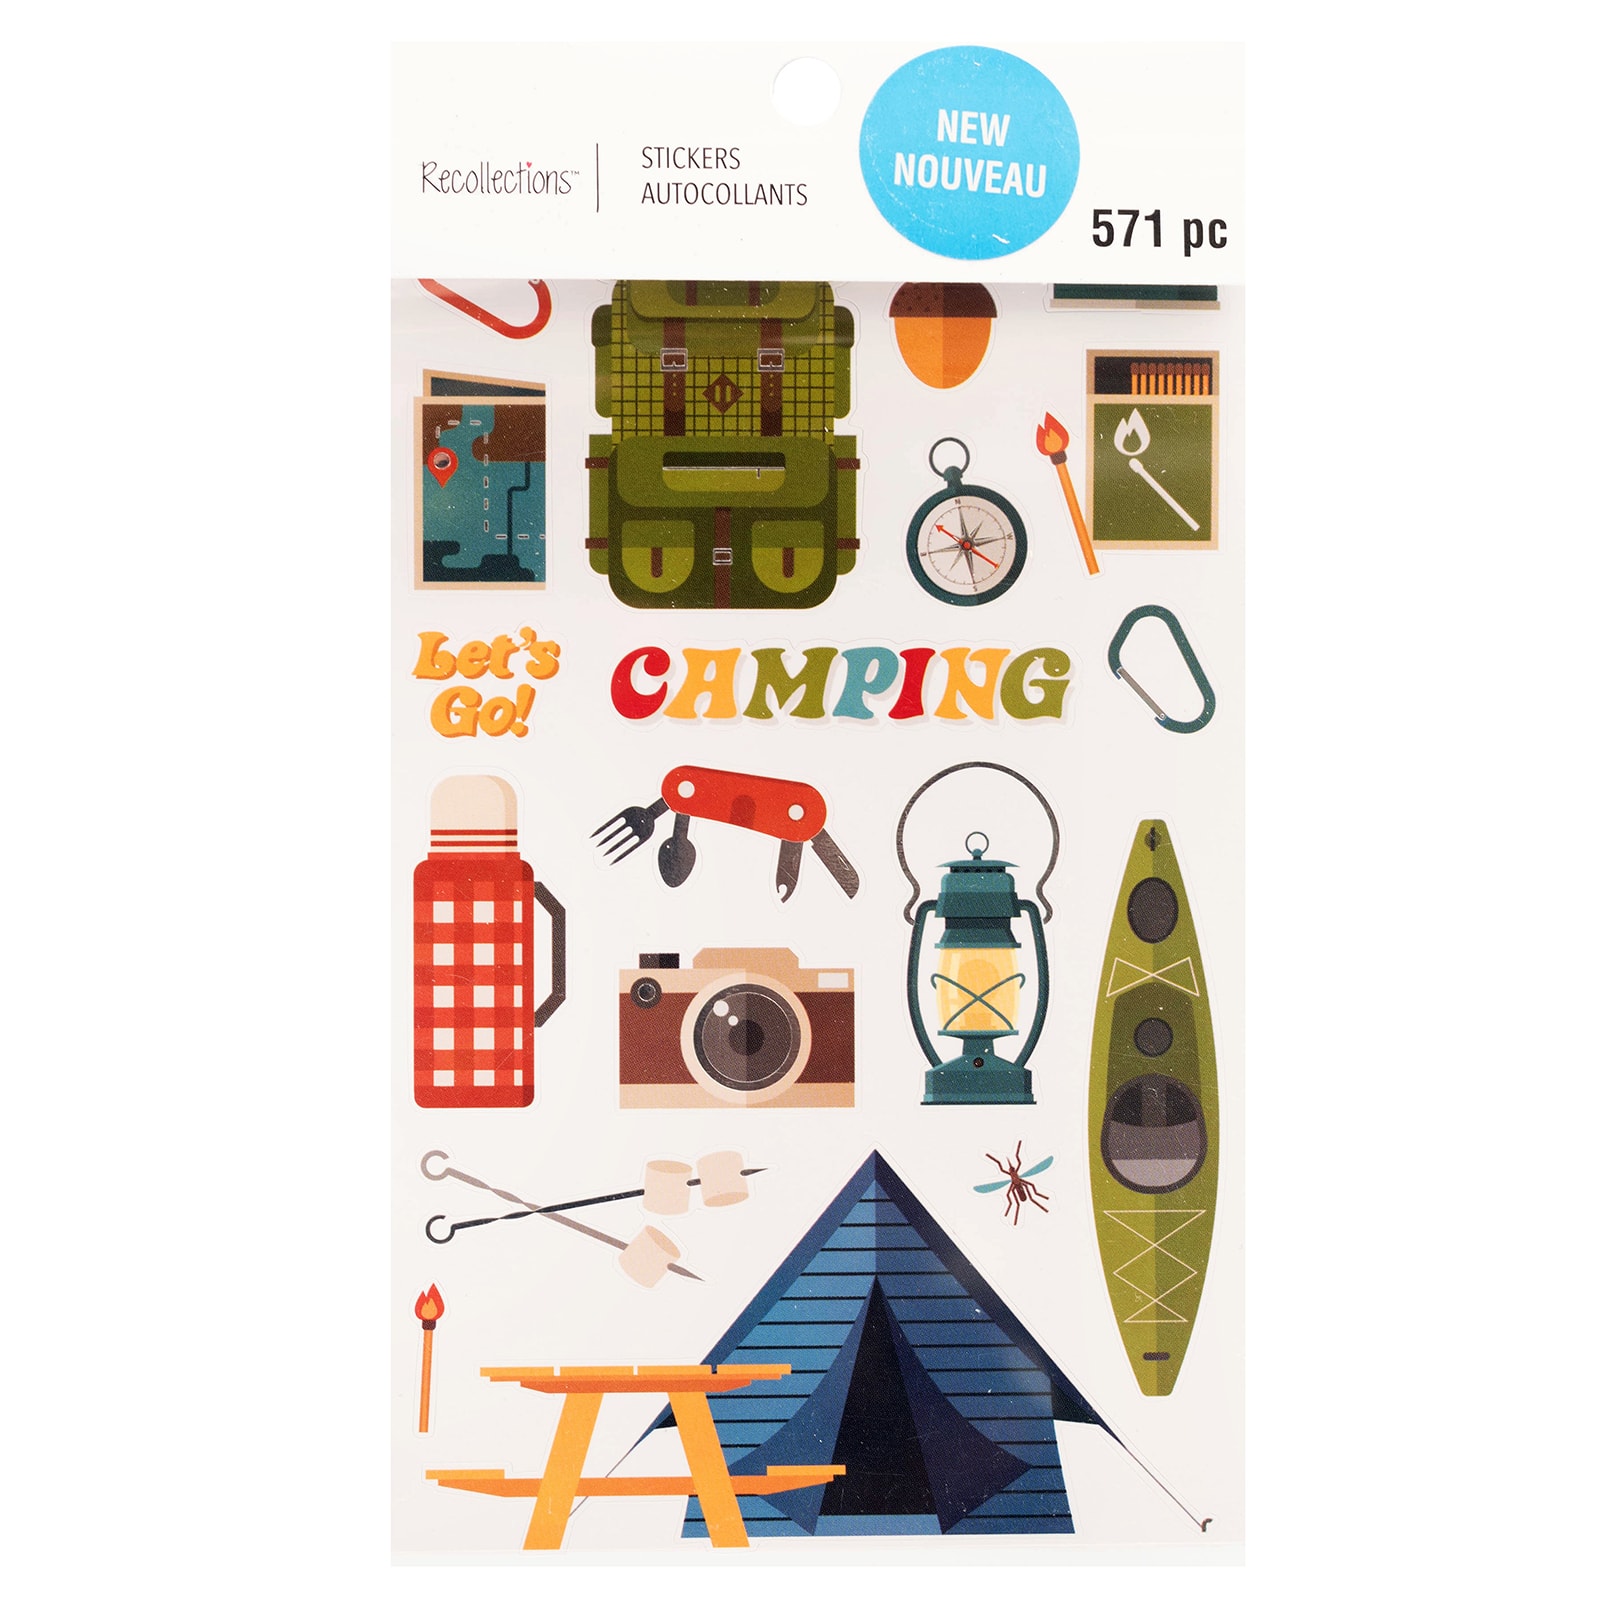 Recollections Camping Stickers - each